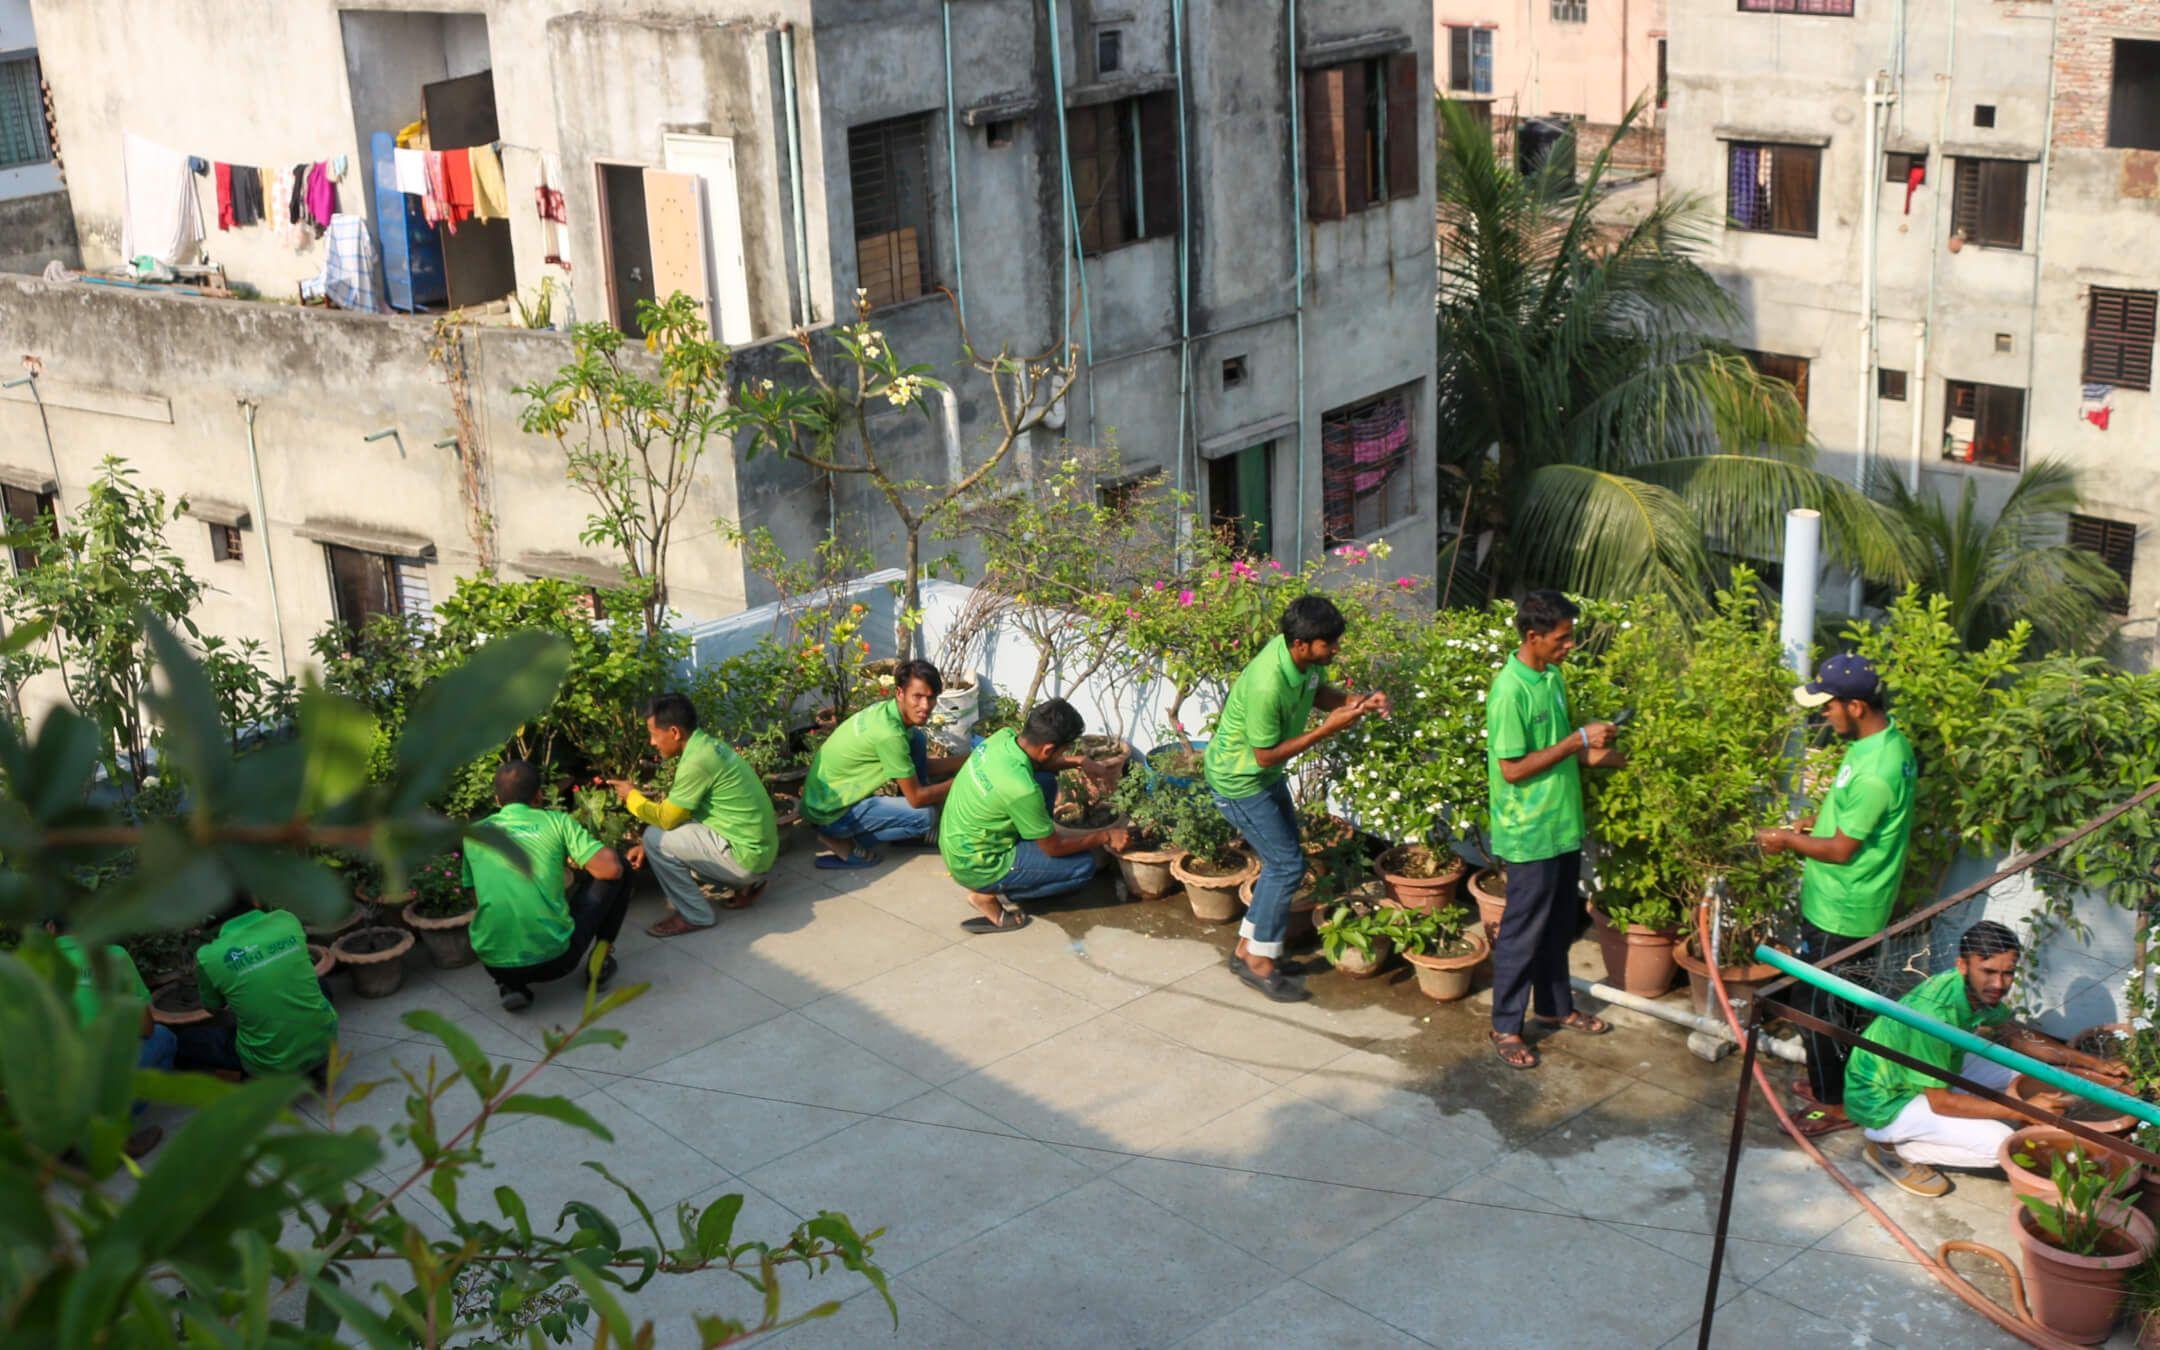 Ahsan’s rooftop gardens have become vibrant learning centres, with many being installed on top of schools and institutes.
Photographer: M A Hannan